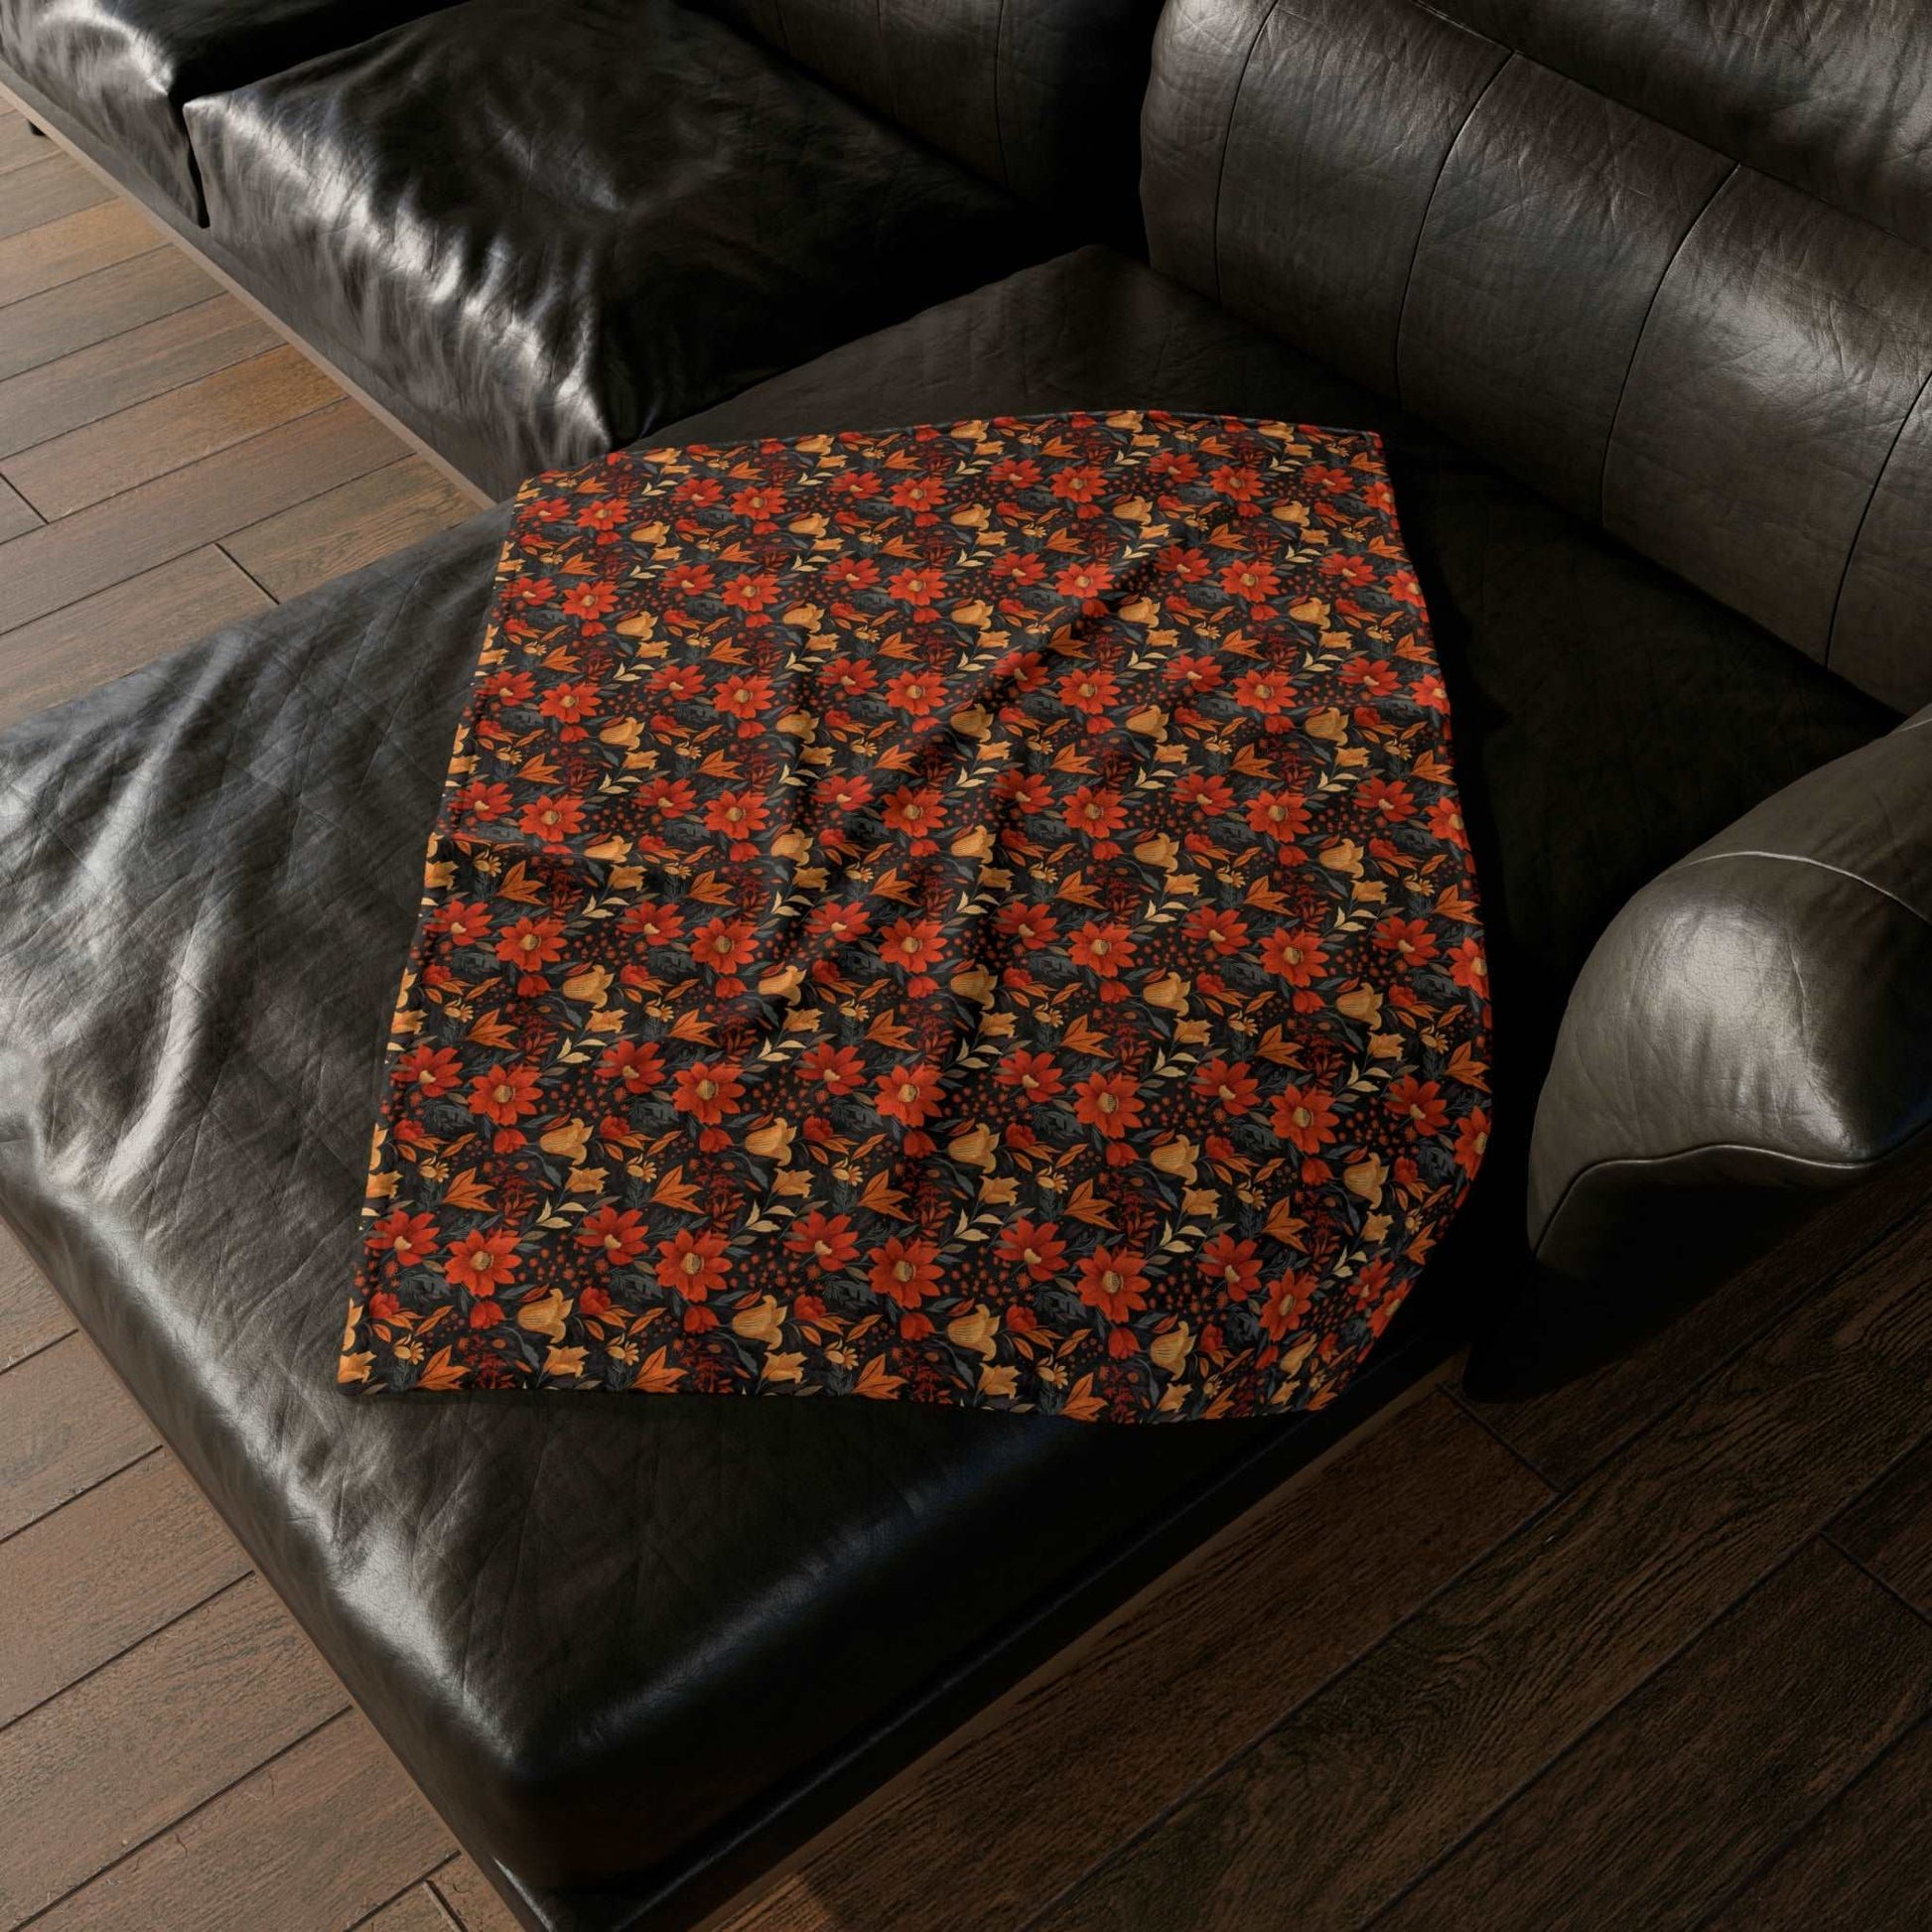 Autumn Blossom Noir: A Dark Floral Canvas - The Ideal Throw for Sofas - Pattern Symphony